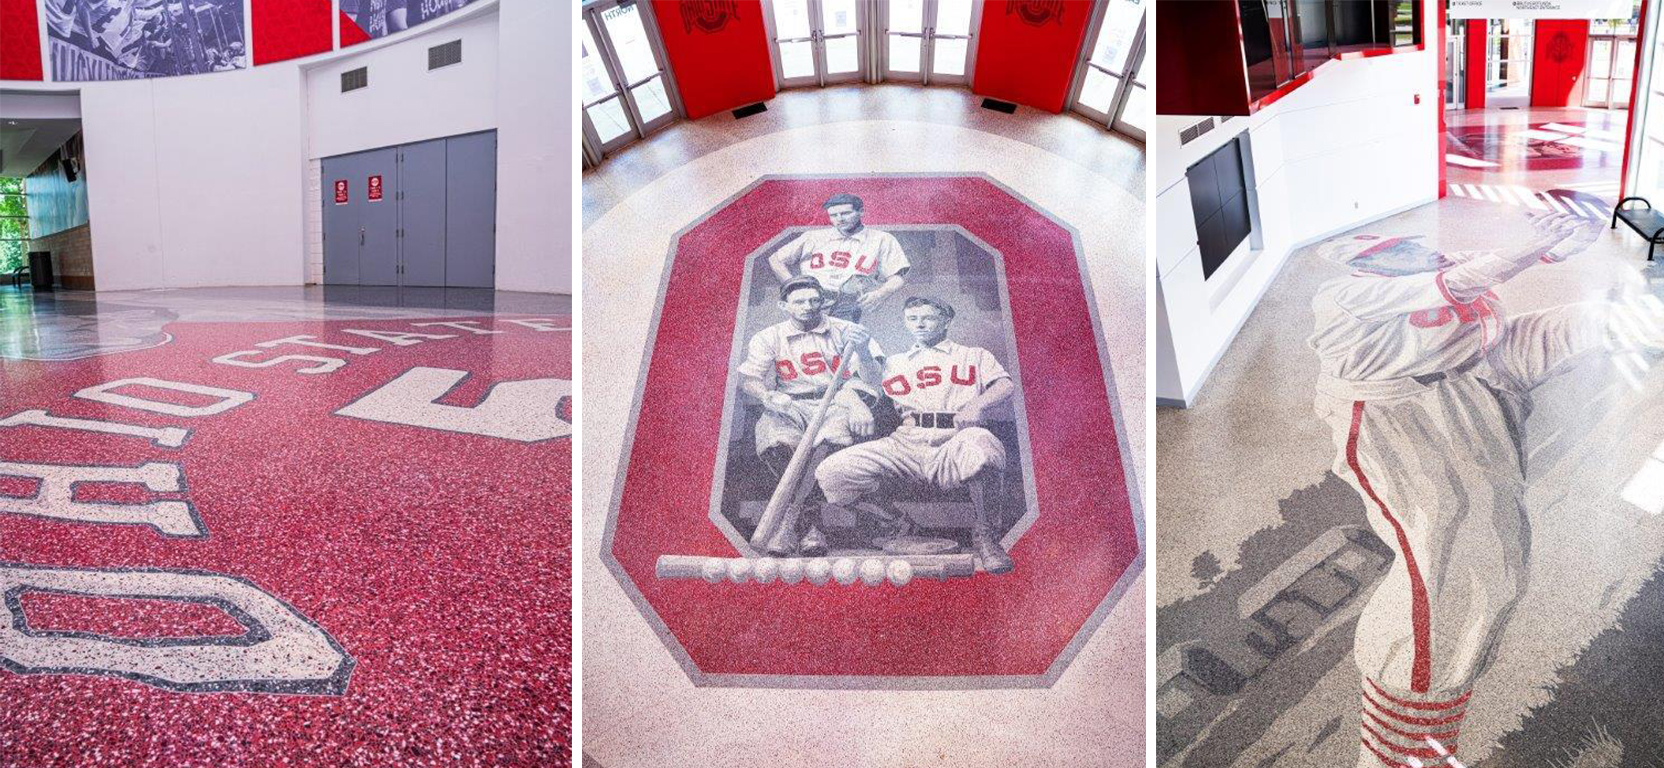 High angle shots of terrazzo floors in The Ohio State University's sports center featuring large grayscale portraits of past athletes with OSU red logo elements.